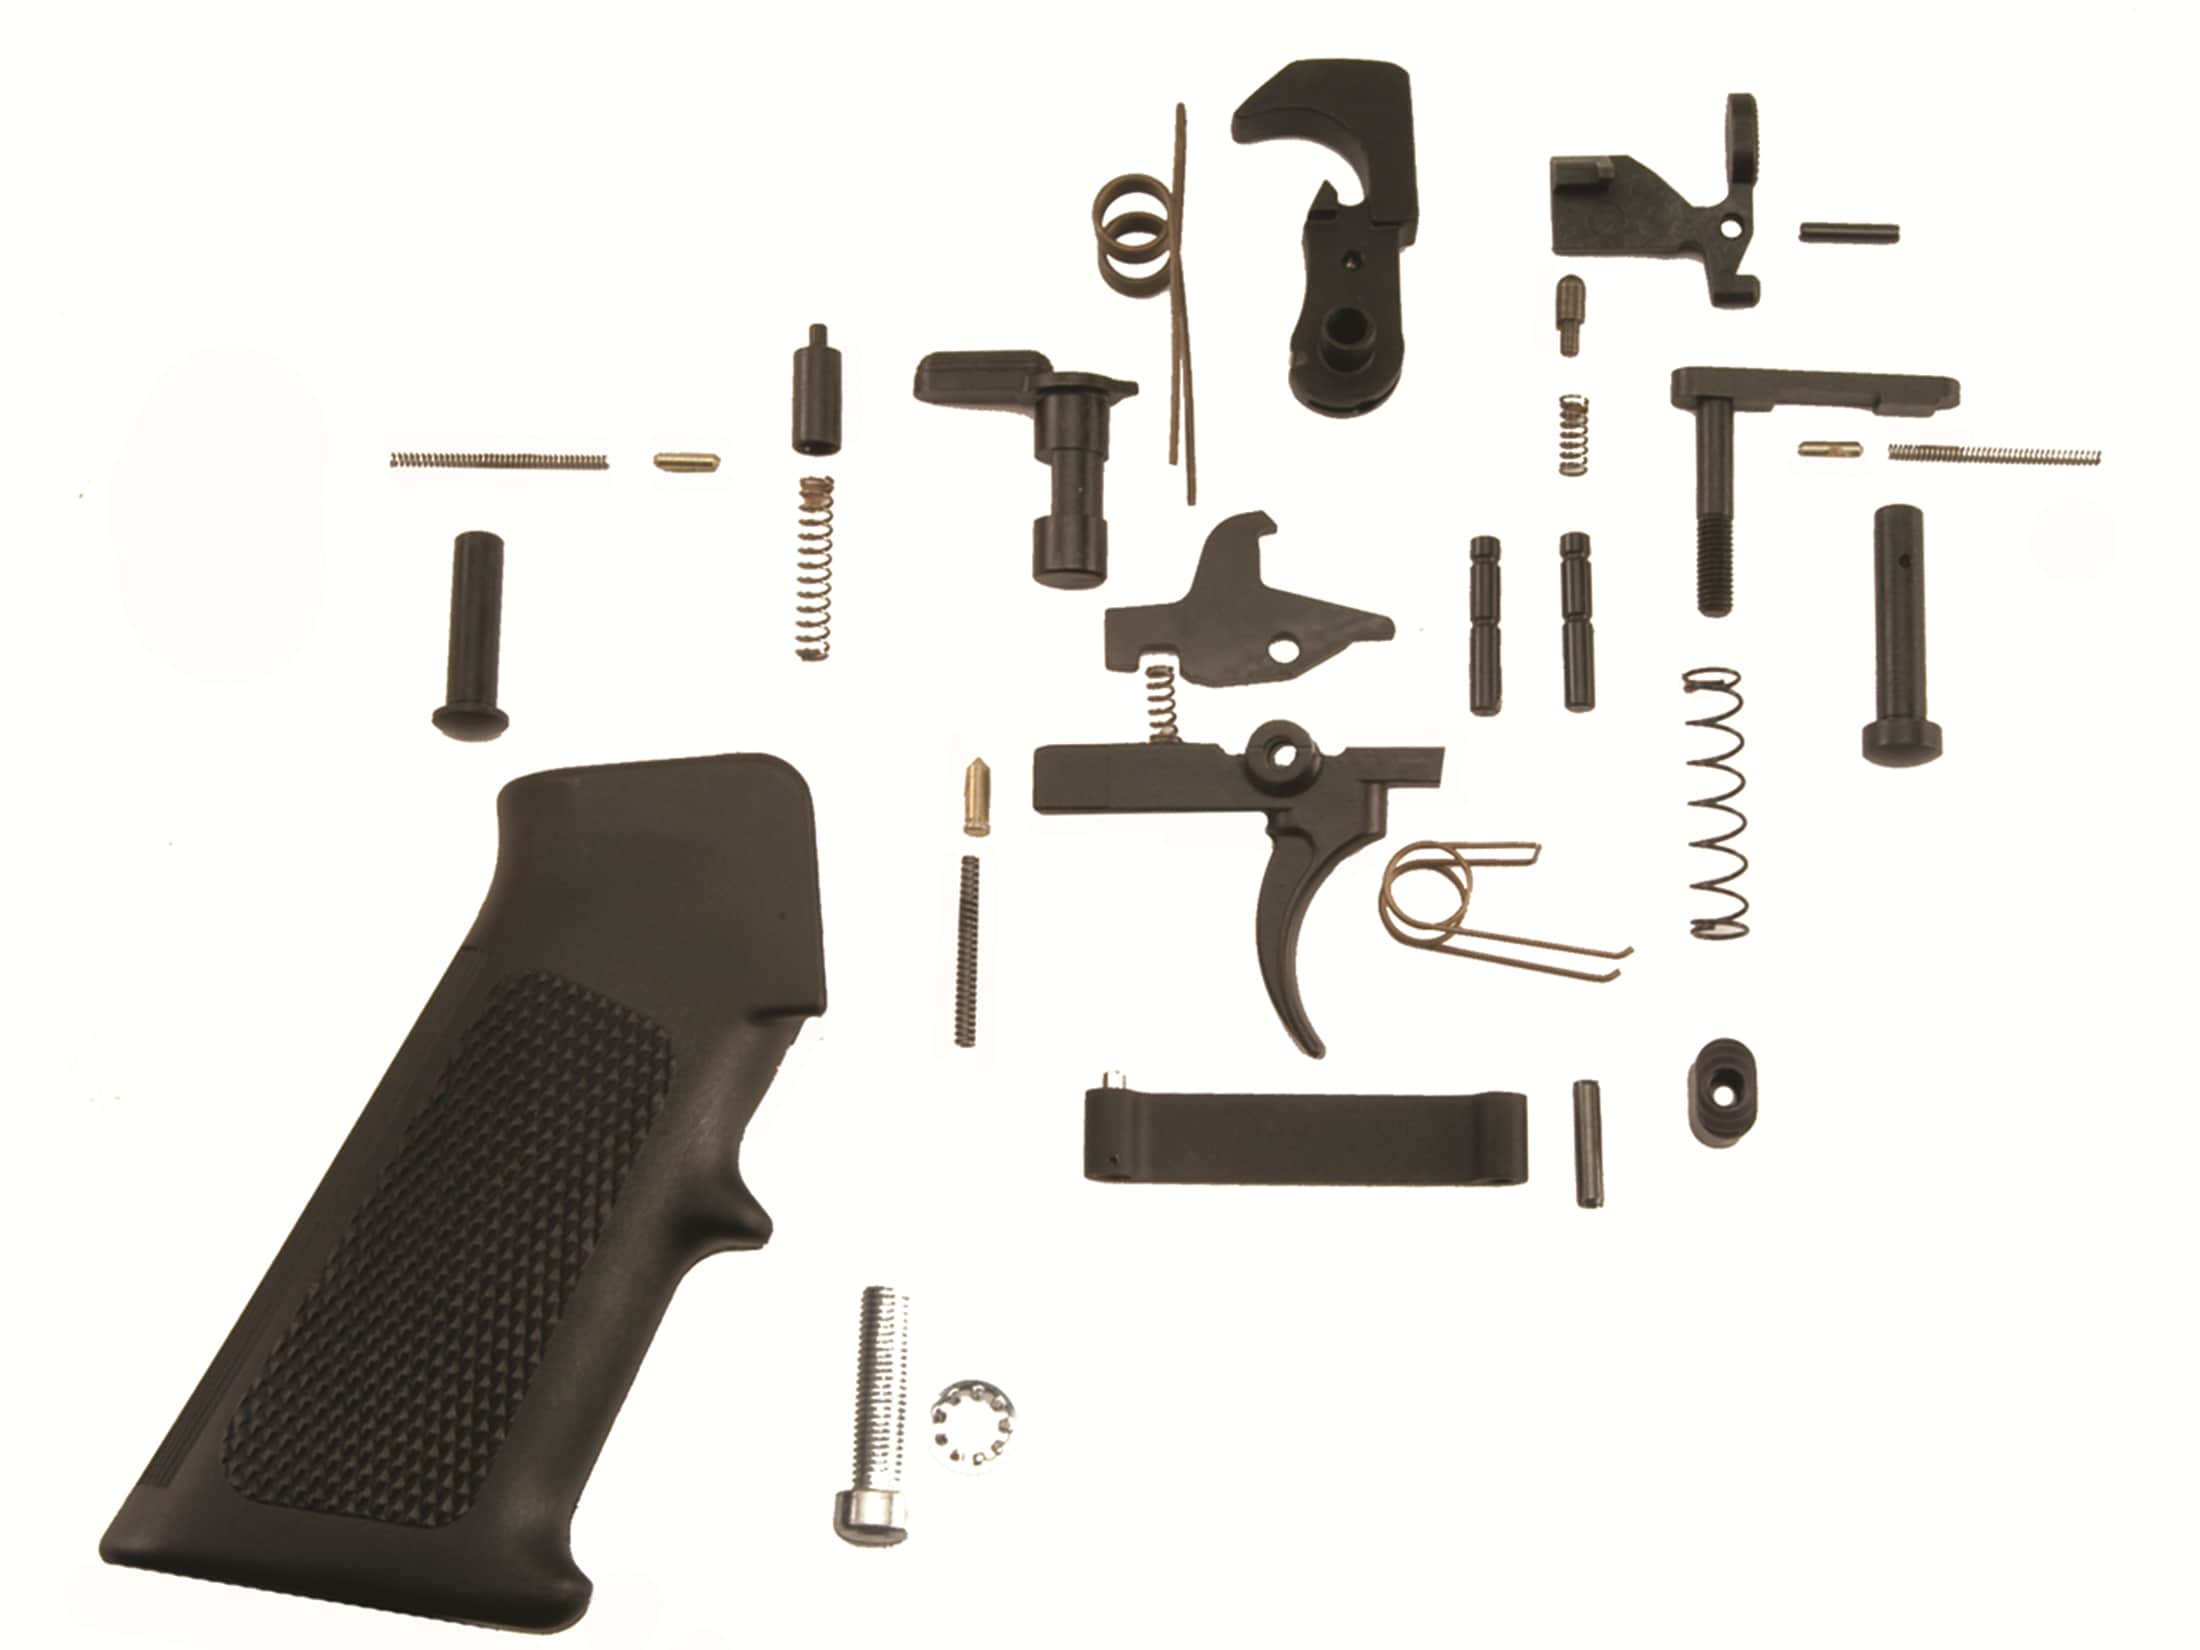 Smith & Wesson M&P15 AR-15 Complete Lower Receiver Parts Ki...